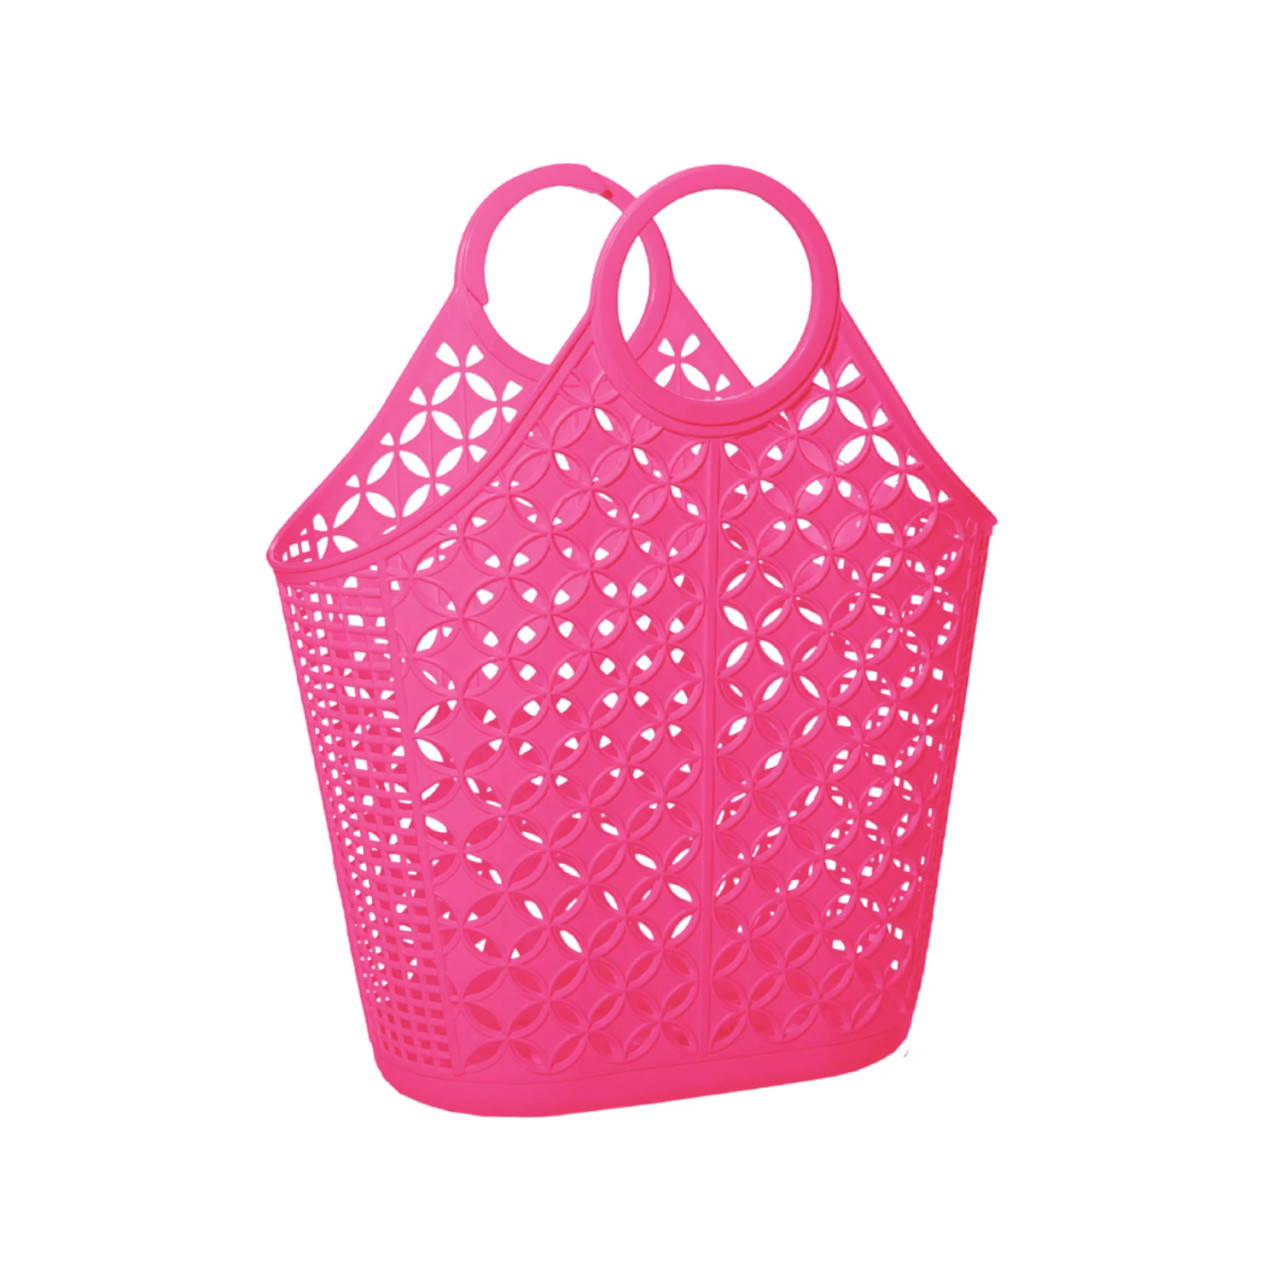 Atomic Tote Jelly Bag - Berry Pink